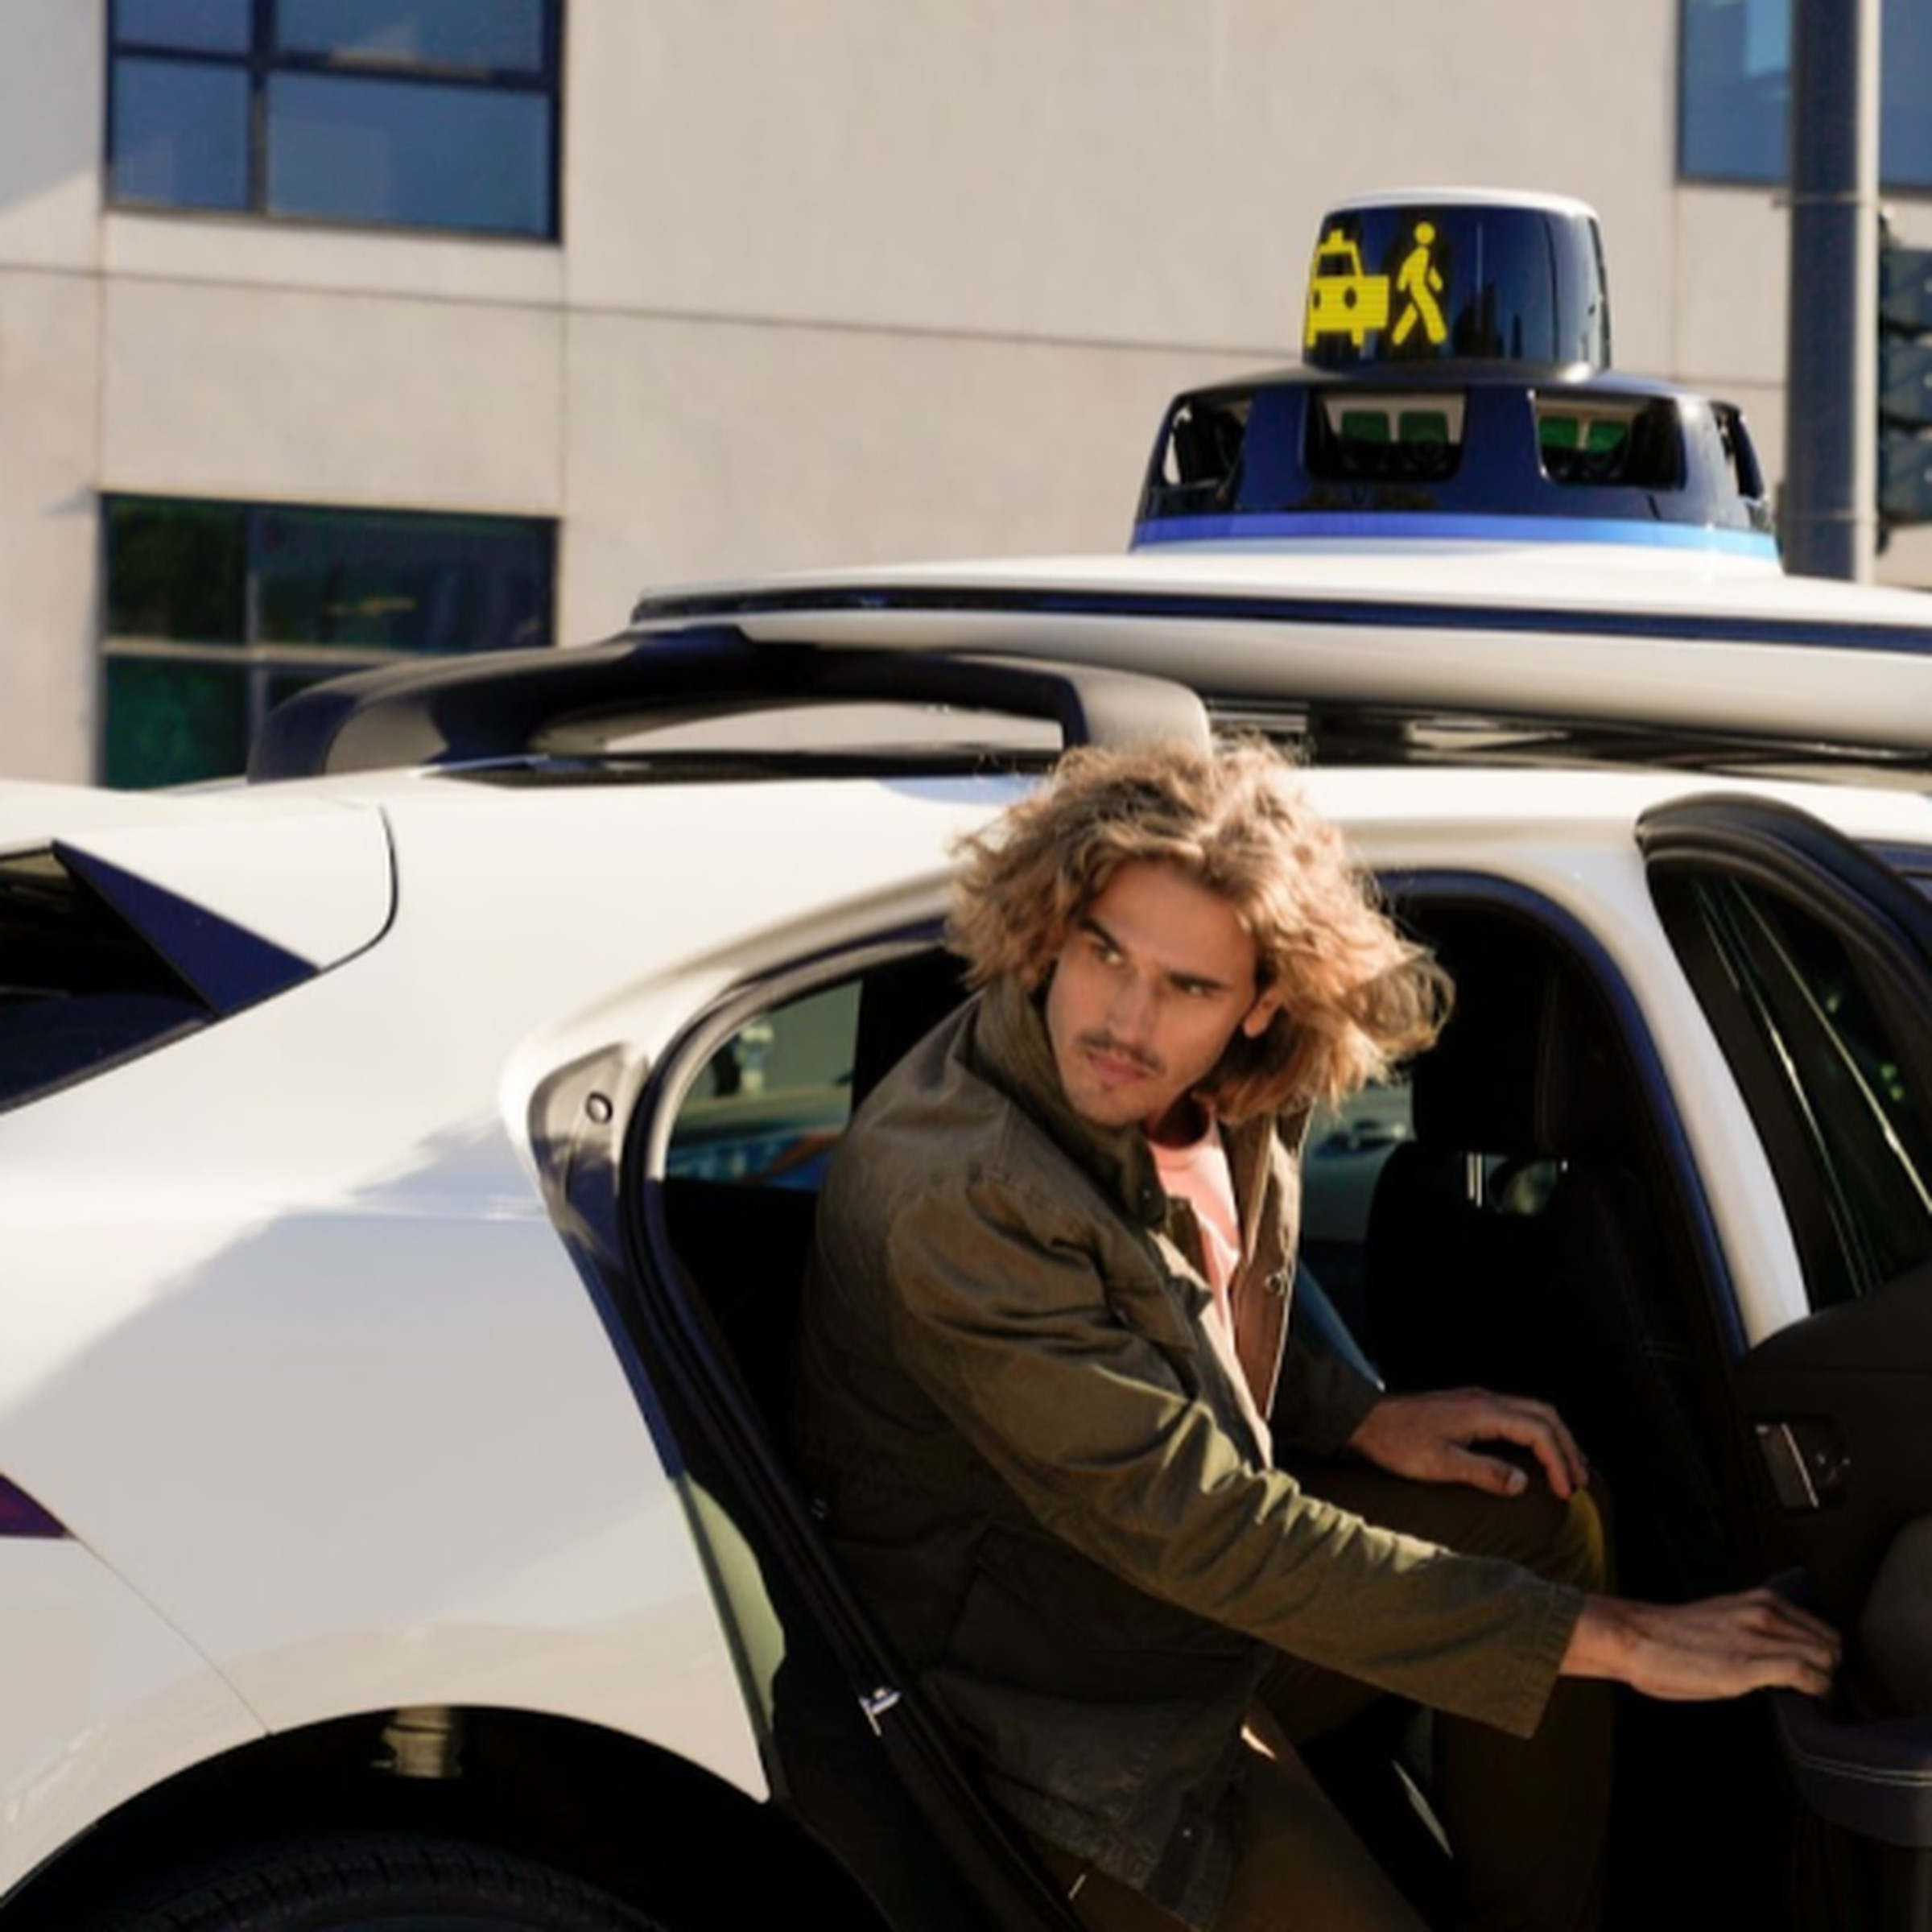 Person exiting a driverless Waymo vehicle with visual cues on roof dome.